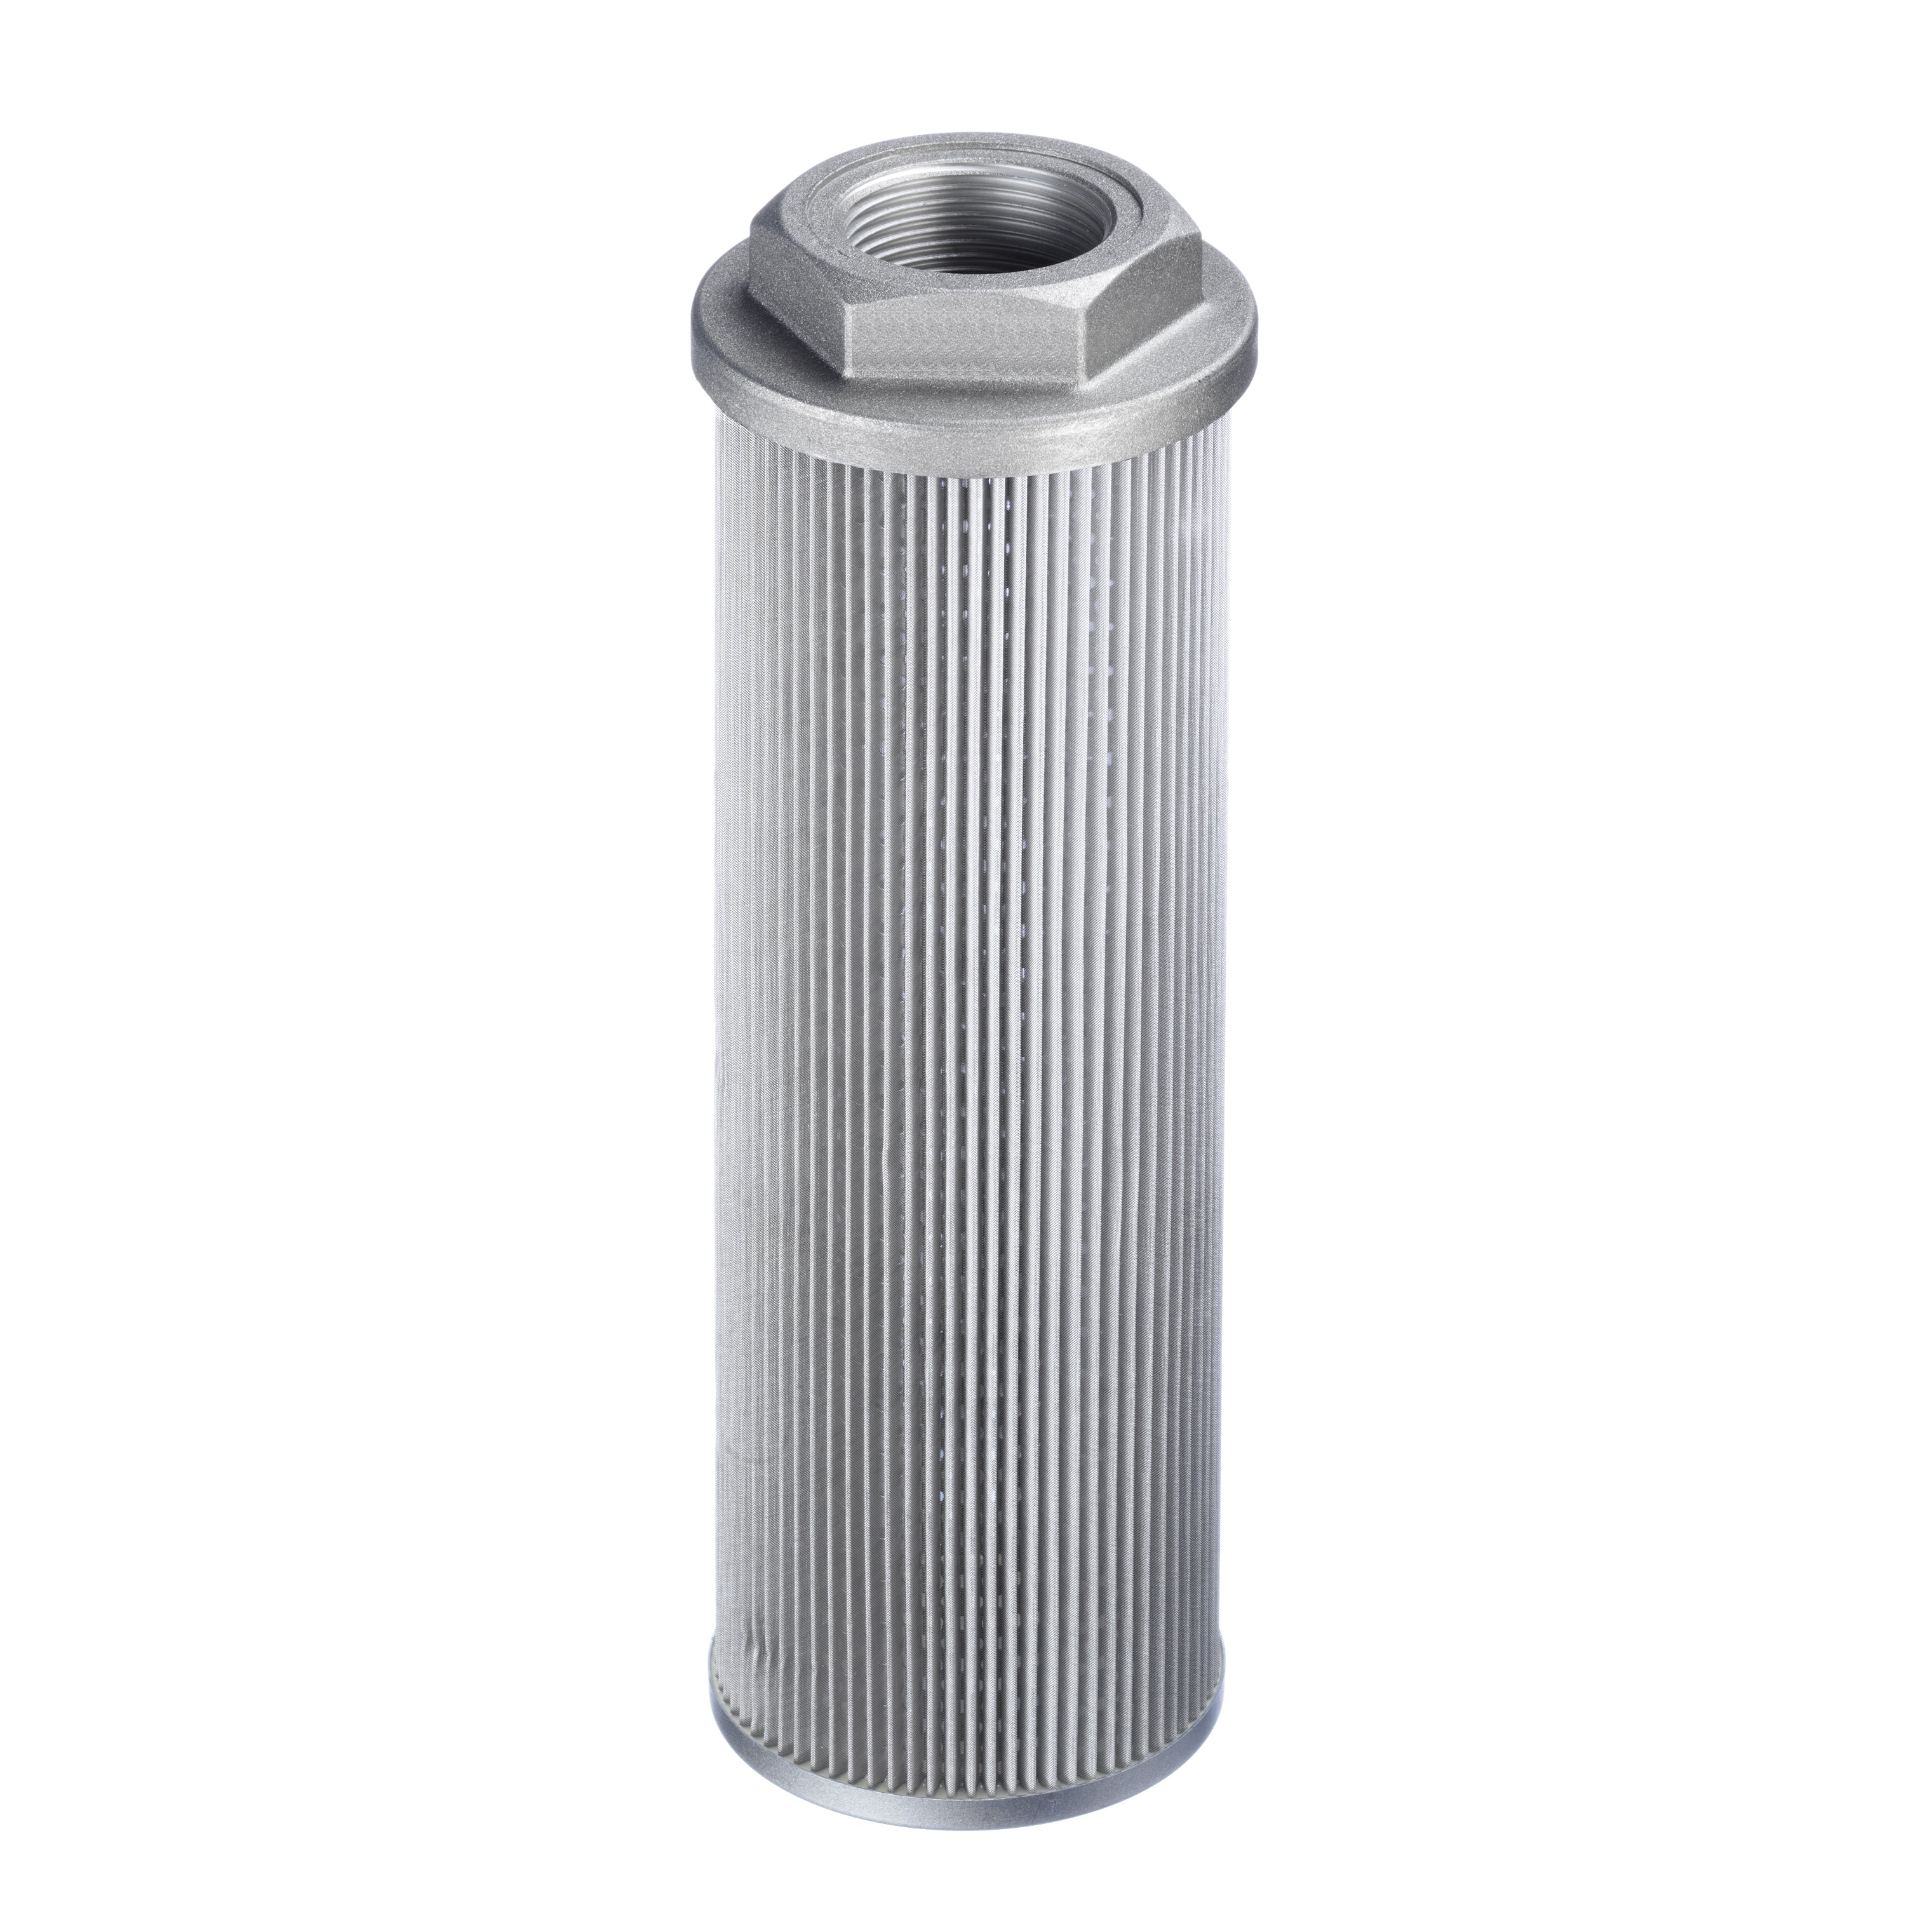 SUS-150-N40-213-125-A-B0.2 : Stauff Suction Strainer, Aluminum End Cap, 2.5" NPT, 88.4GPM, 125 Micron, 3psi Bypass